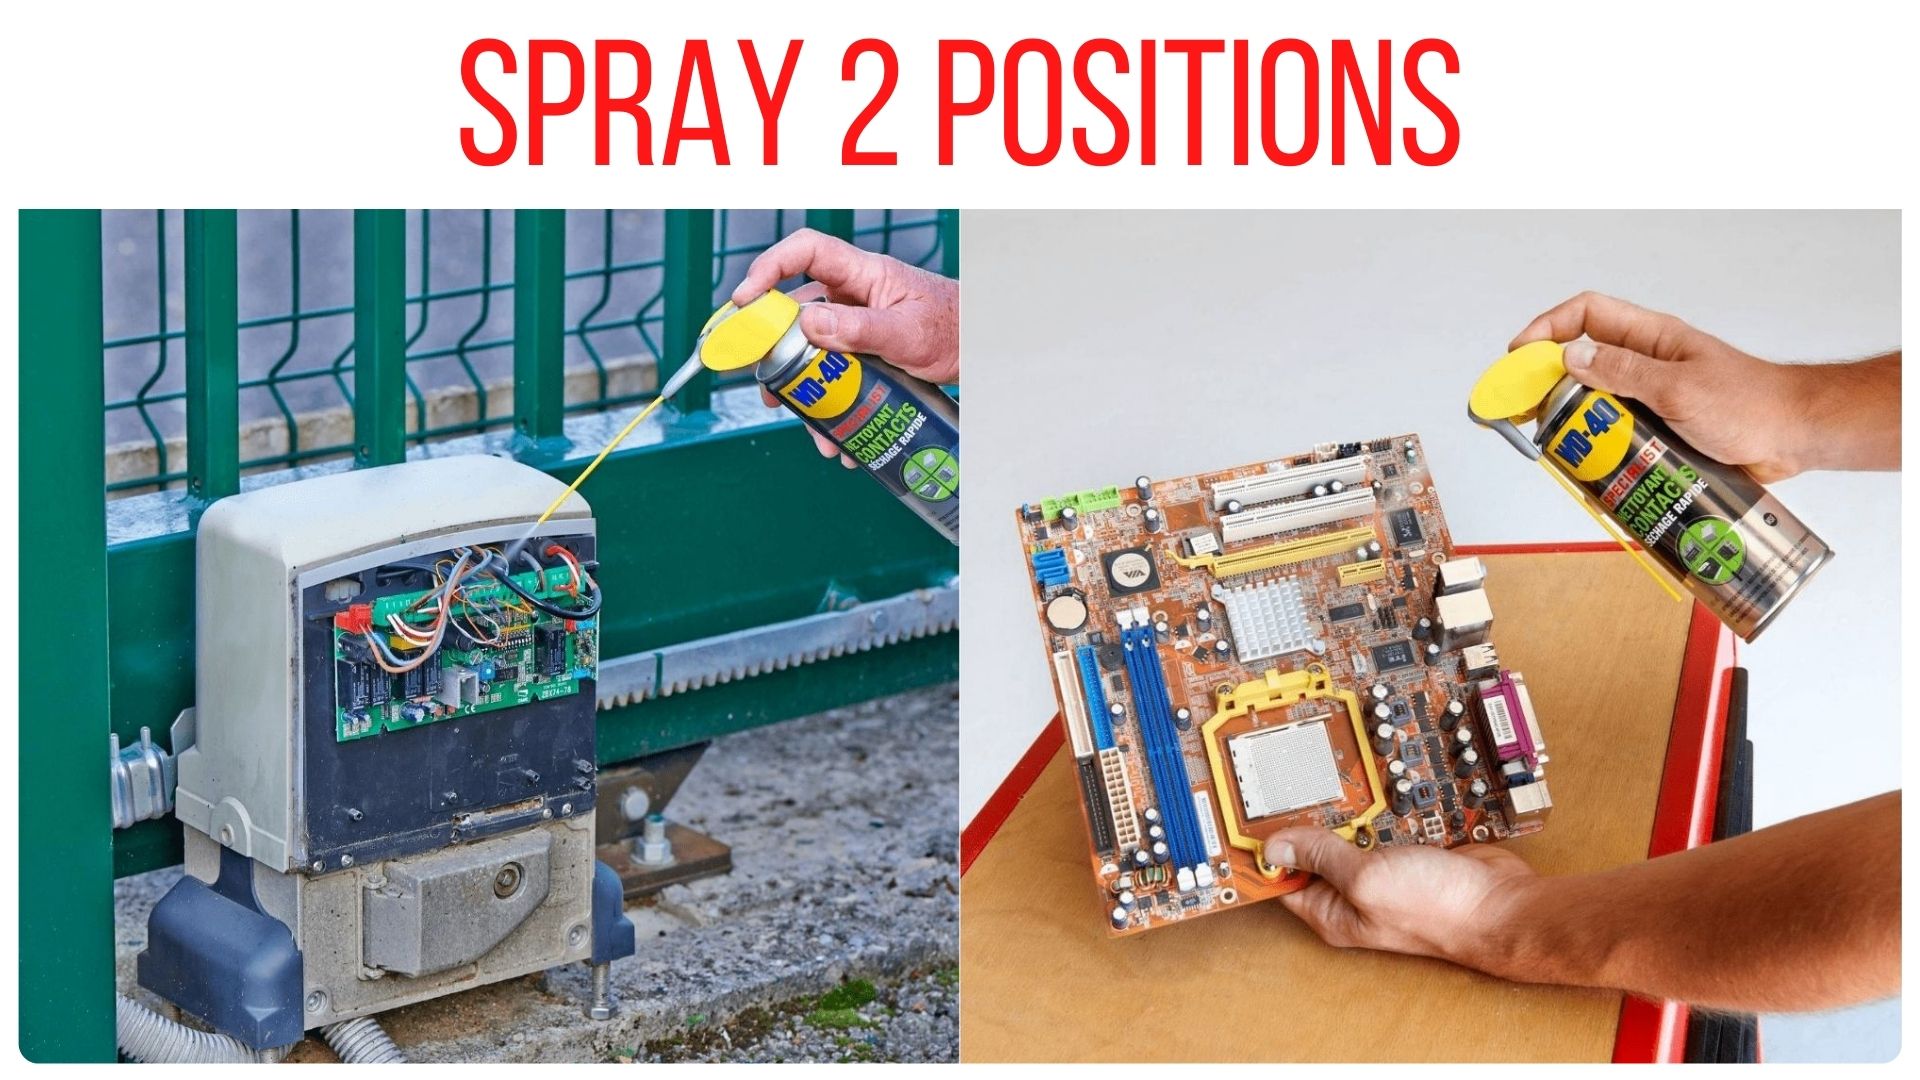 WD40 spray double position